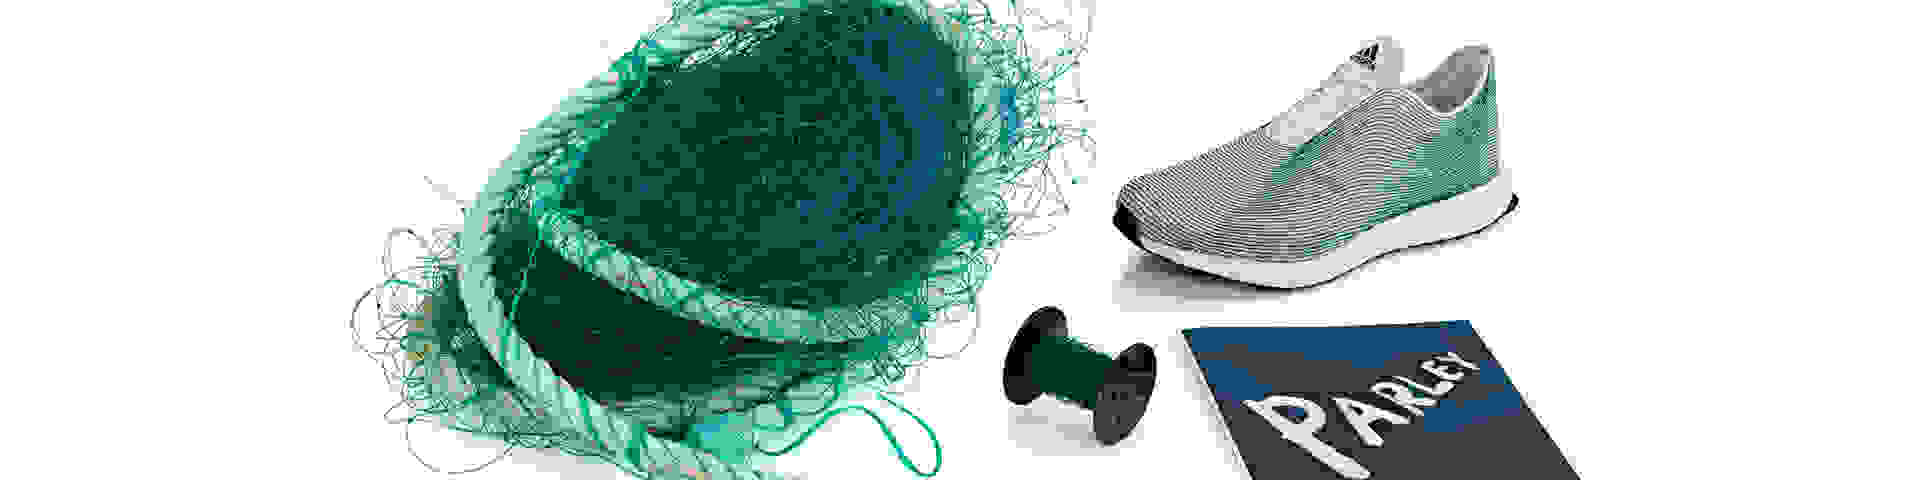 An image of adidas' Parley shoe next to a fishing net and rope.